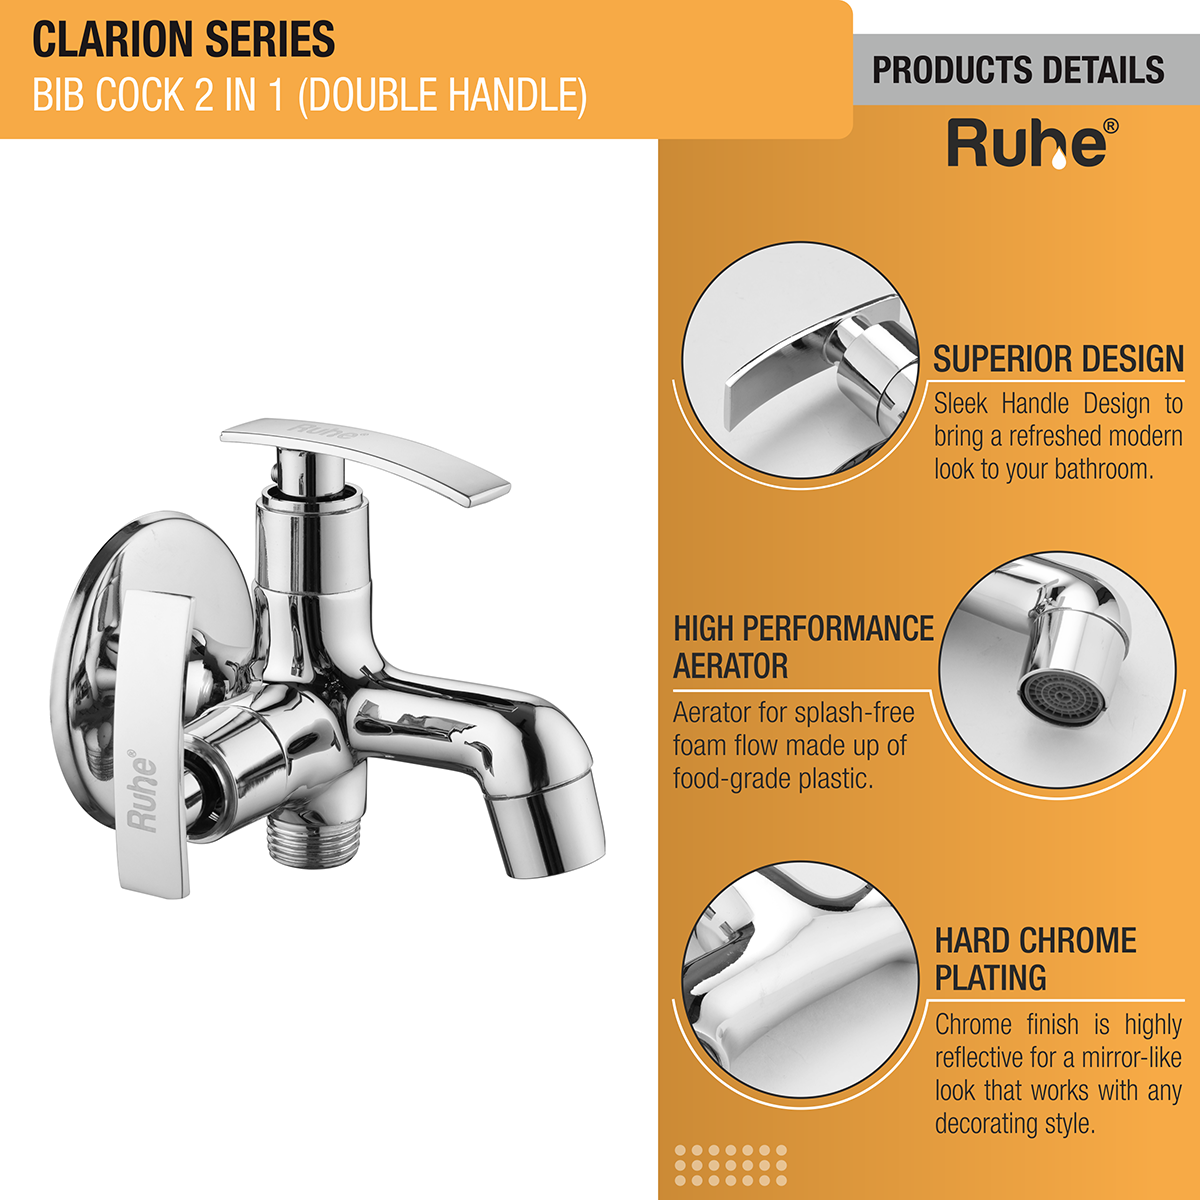 Clarion Two Way Bib Tap Brass Faucet (Double Handle) product details